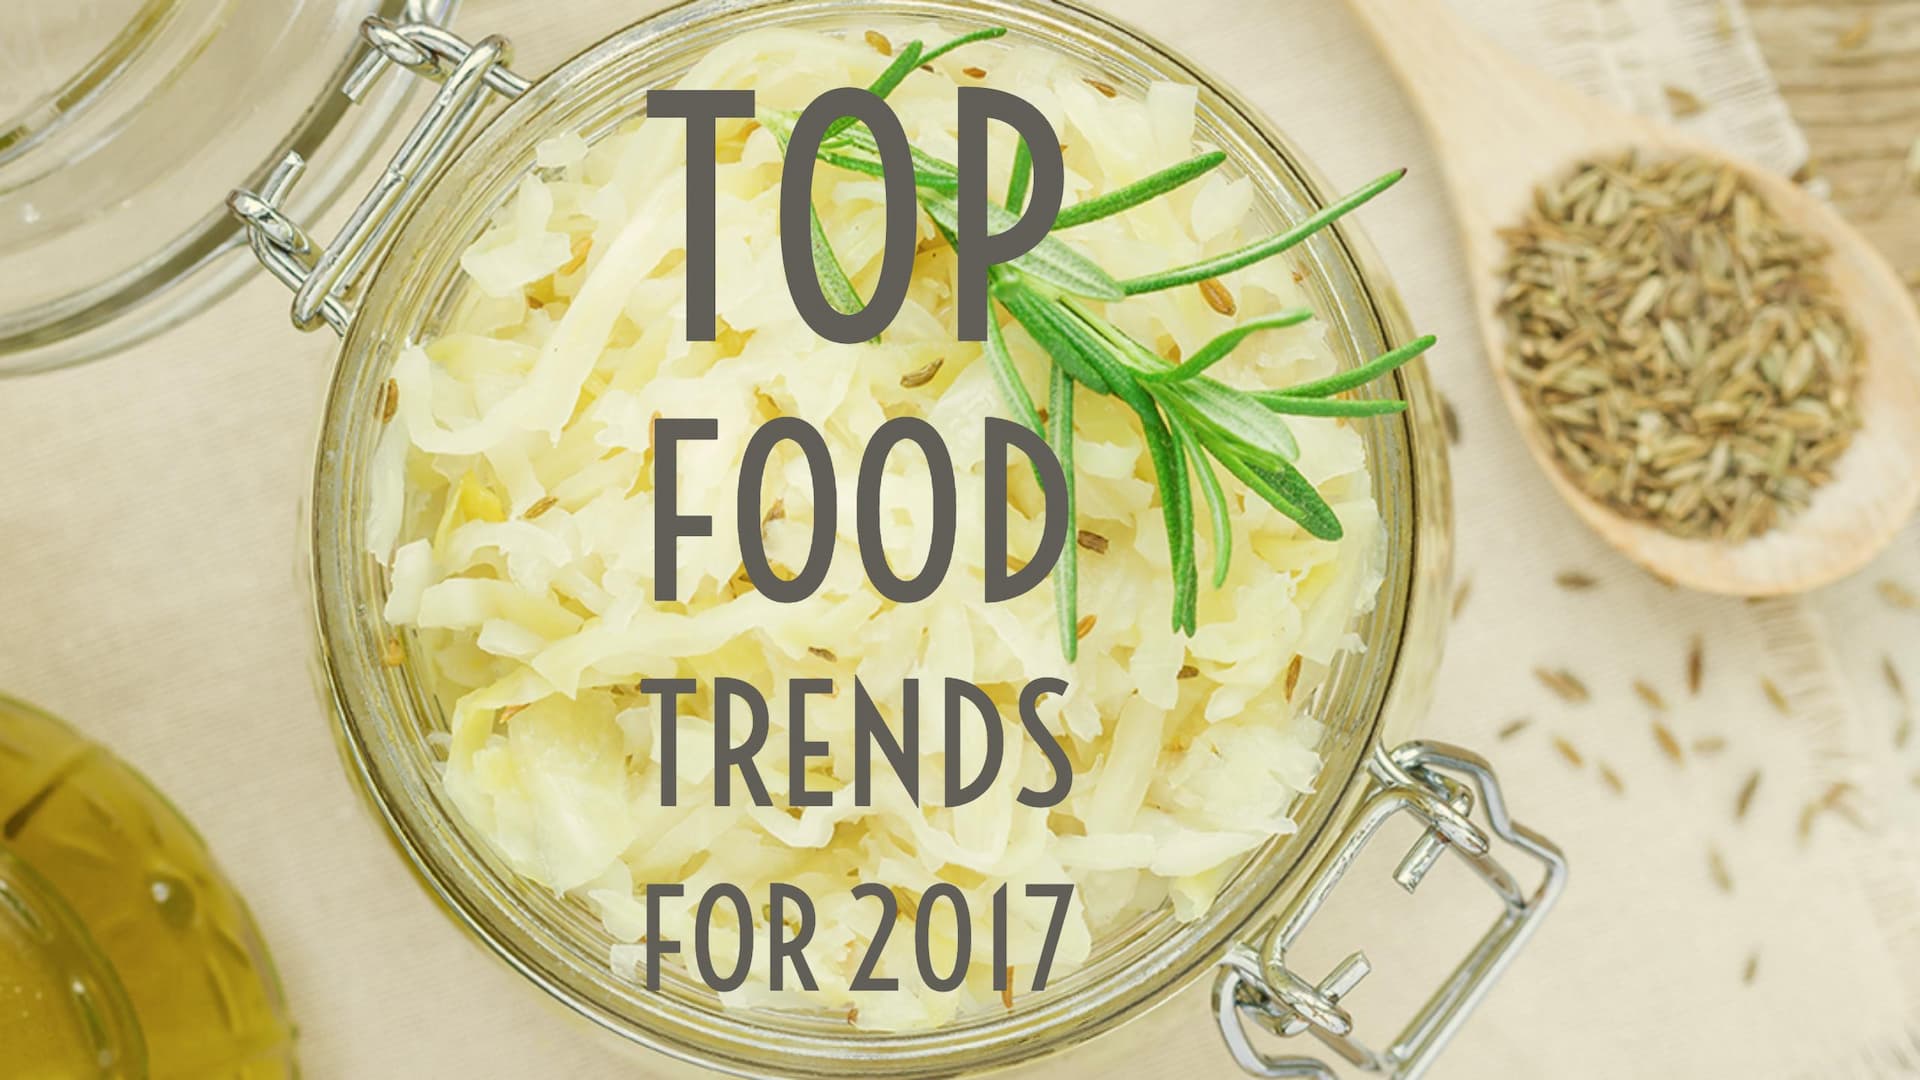 Top Food Trends for 2017